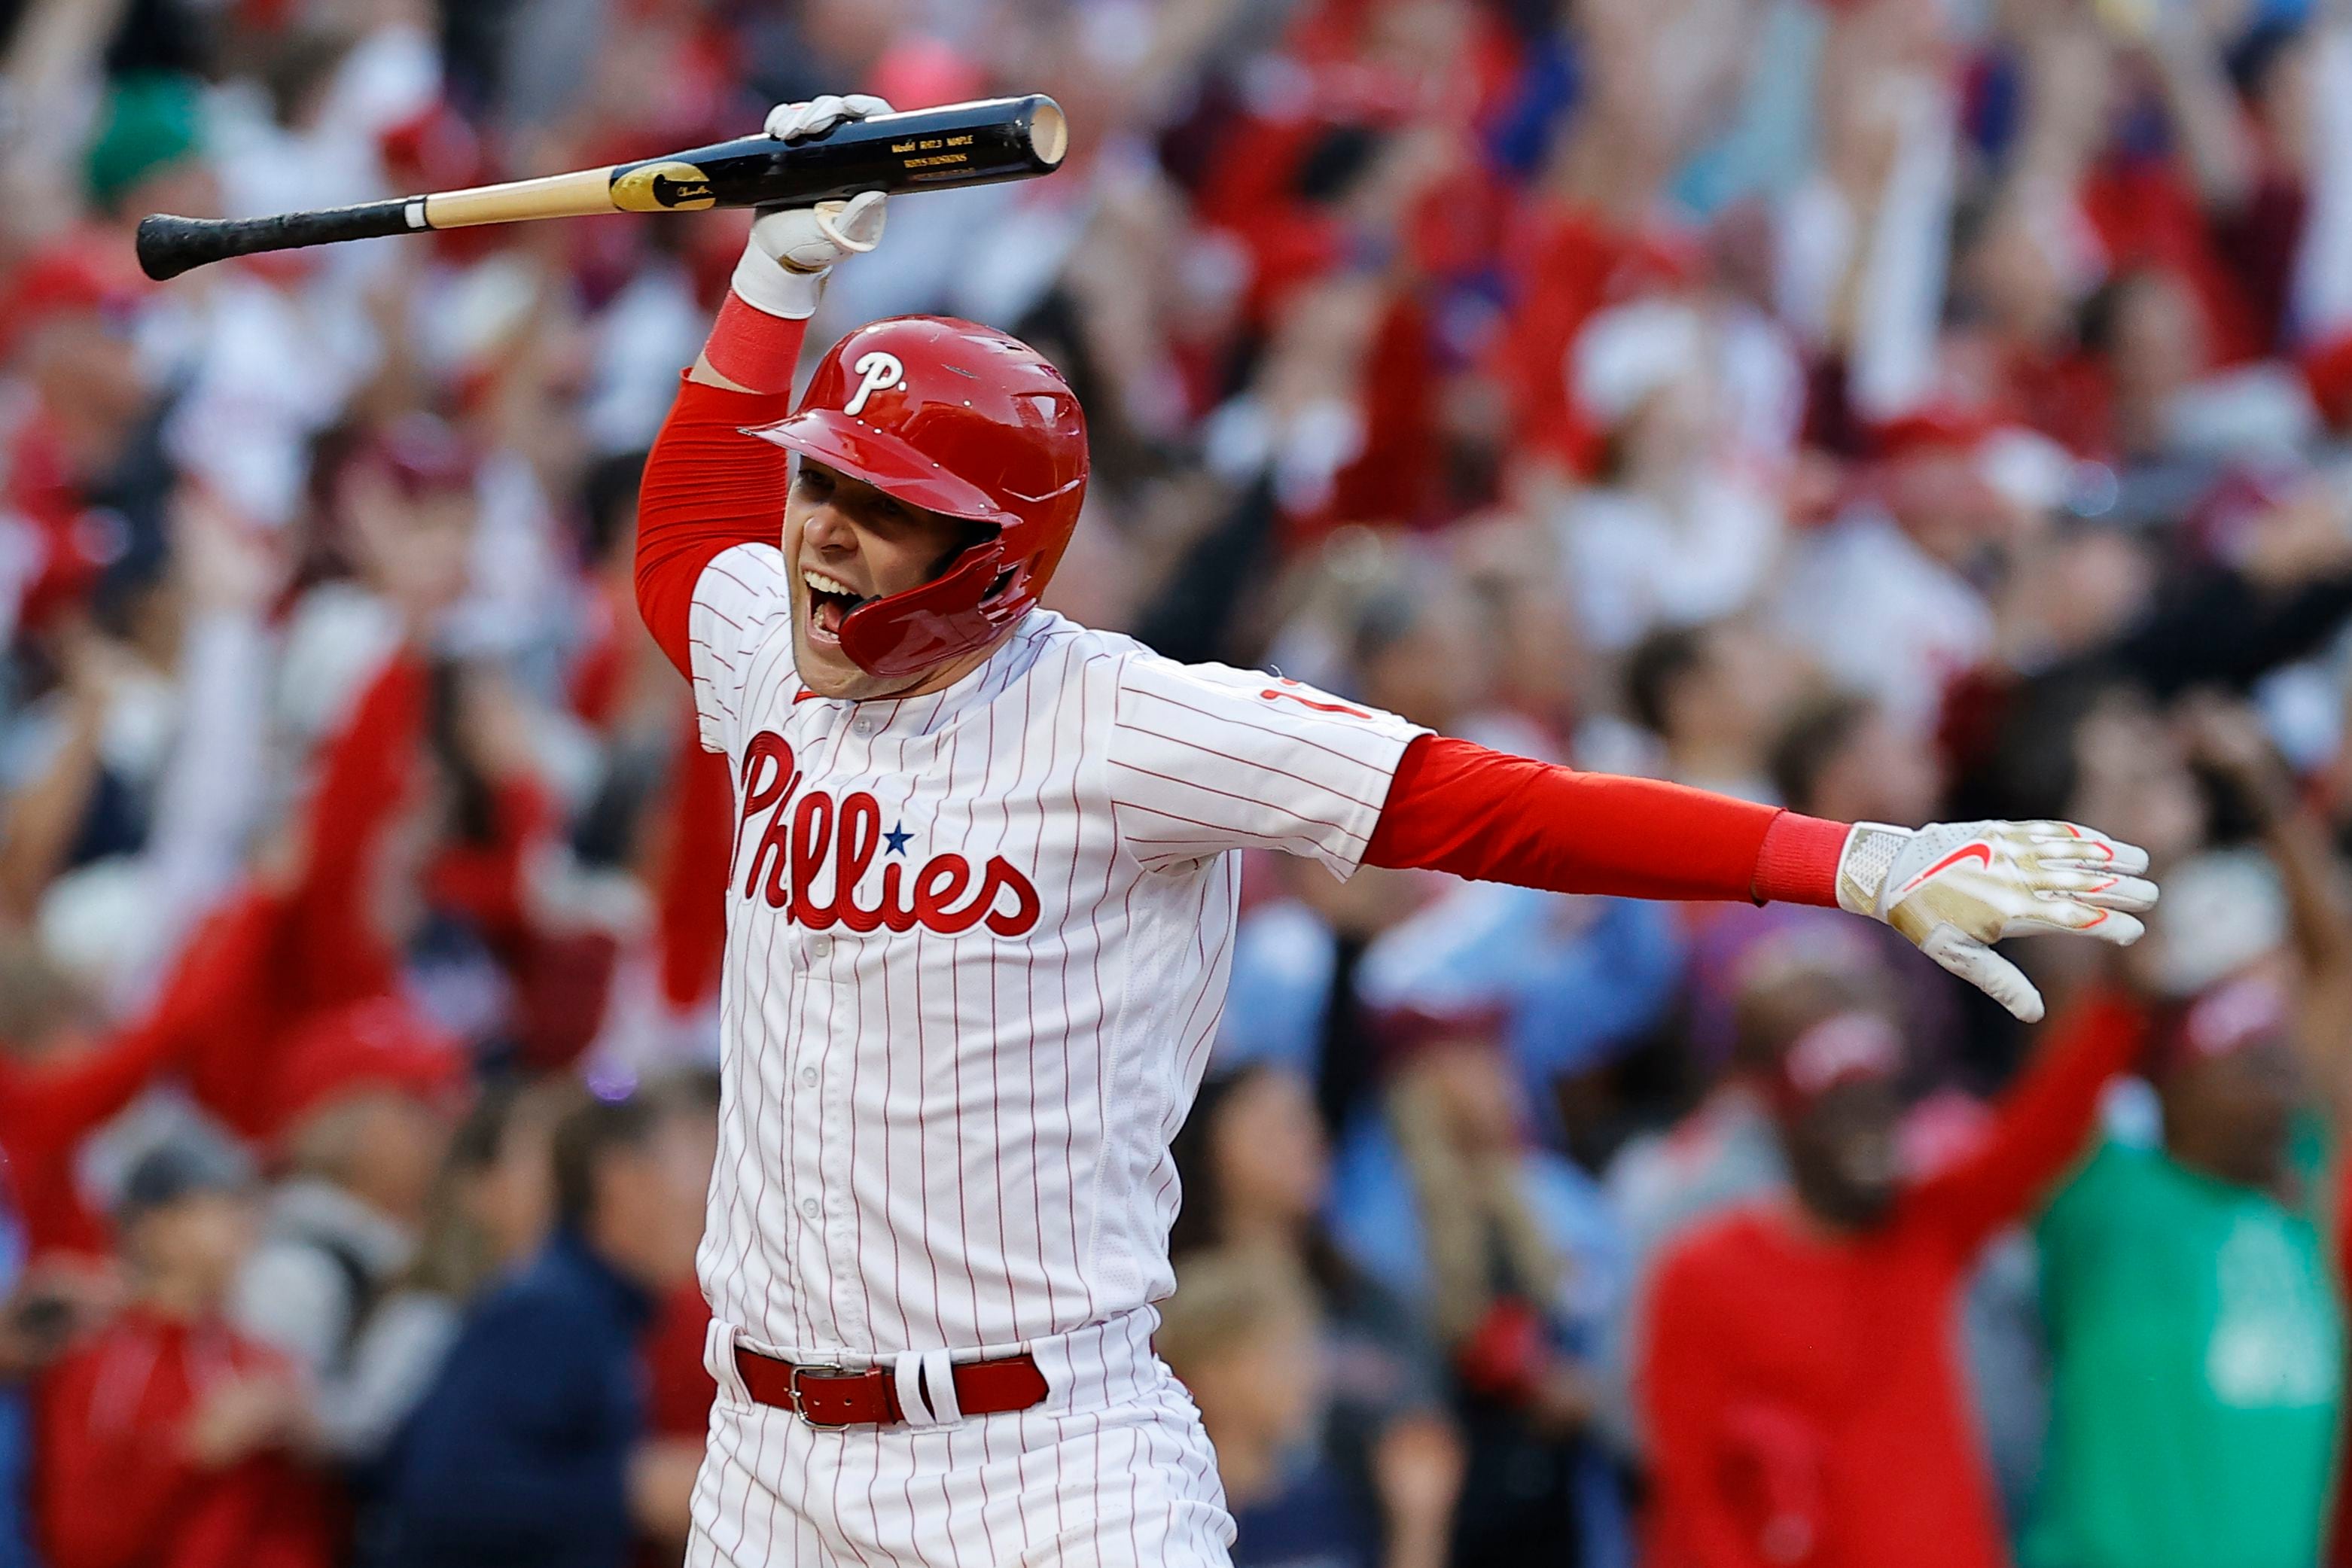 PHILS RHYS HOSKINS BAT SPIKE, A MOMENT IN PHILLY SPORTS HISTORY!